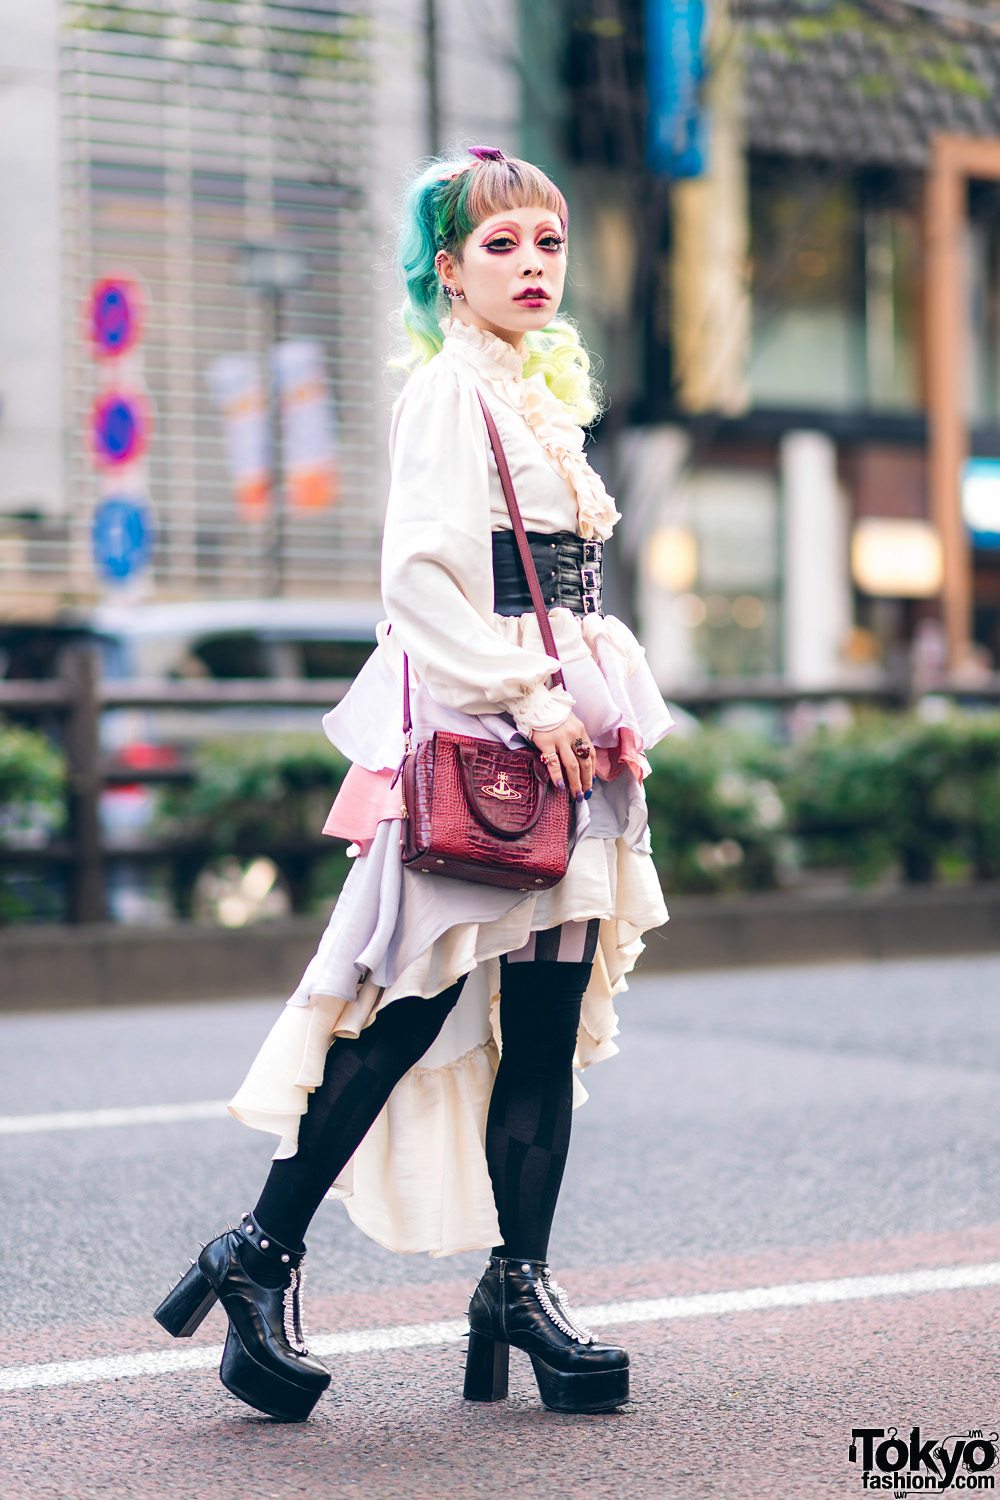 6%DokiDoki Staffer in Chic Ruffle Street Fashion w/ Colored Hair, Red Eye Makeup, Belted Corset, 6D High Low Tiered Skirt, Vivienne Westwood Sling & Disturbia Clothing Platforms